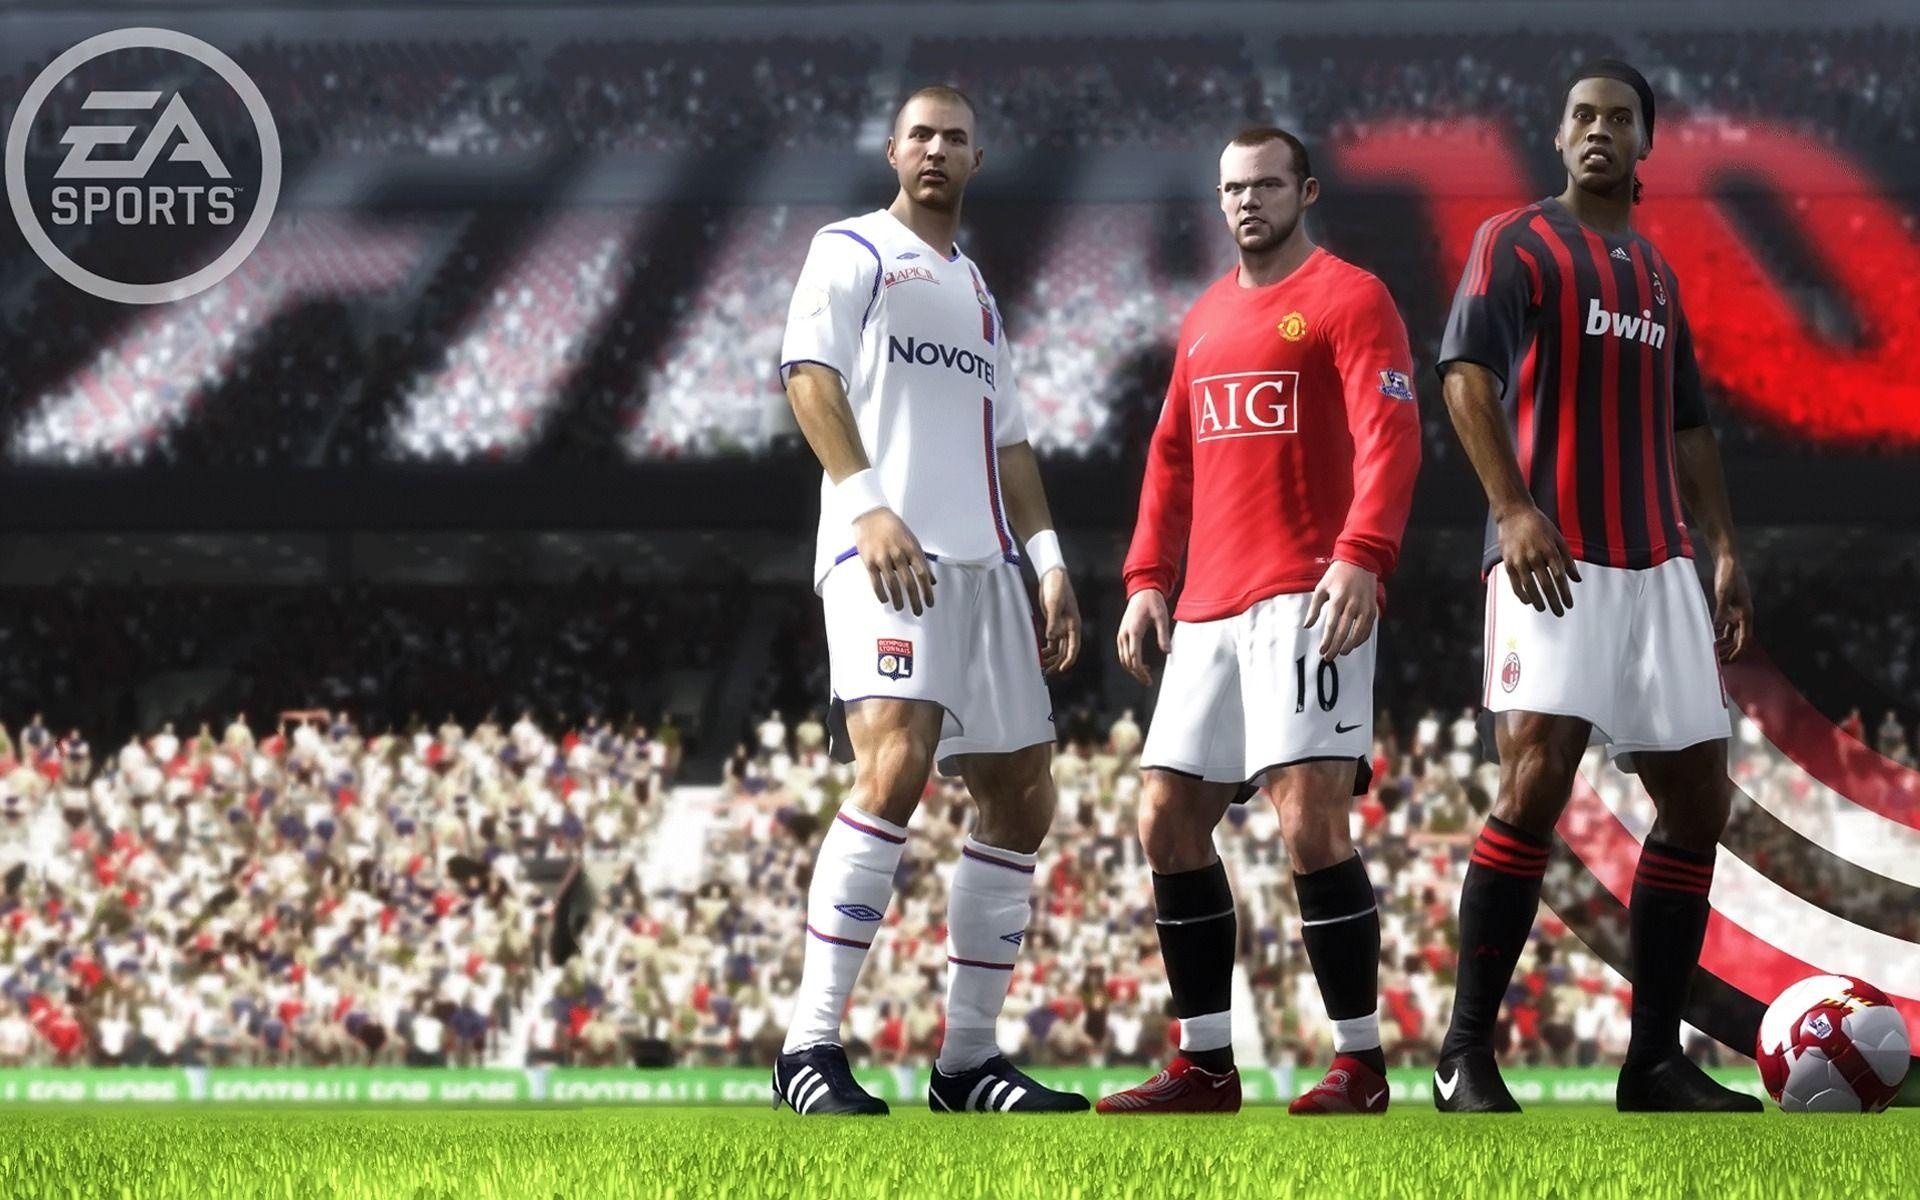 FIFA Soccer (Game): EA Sports FC from 2023, A series of association football video games. 1920x1200 HD Wallpaper.